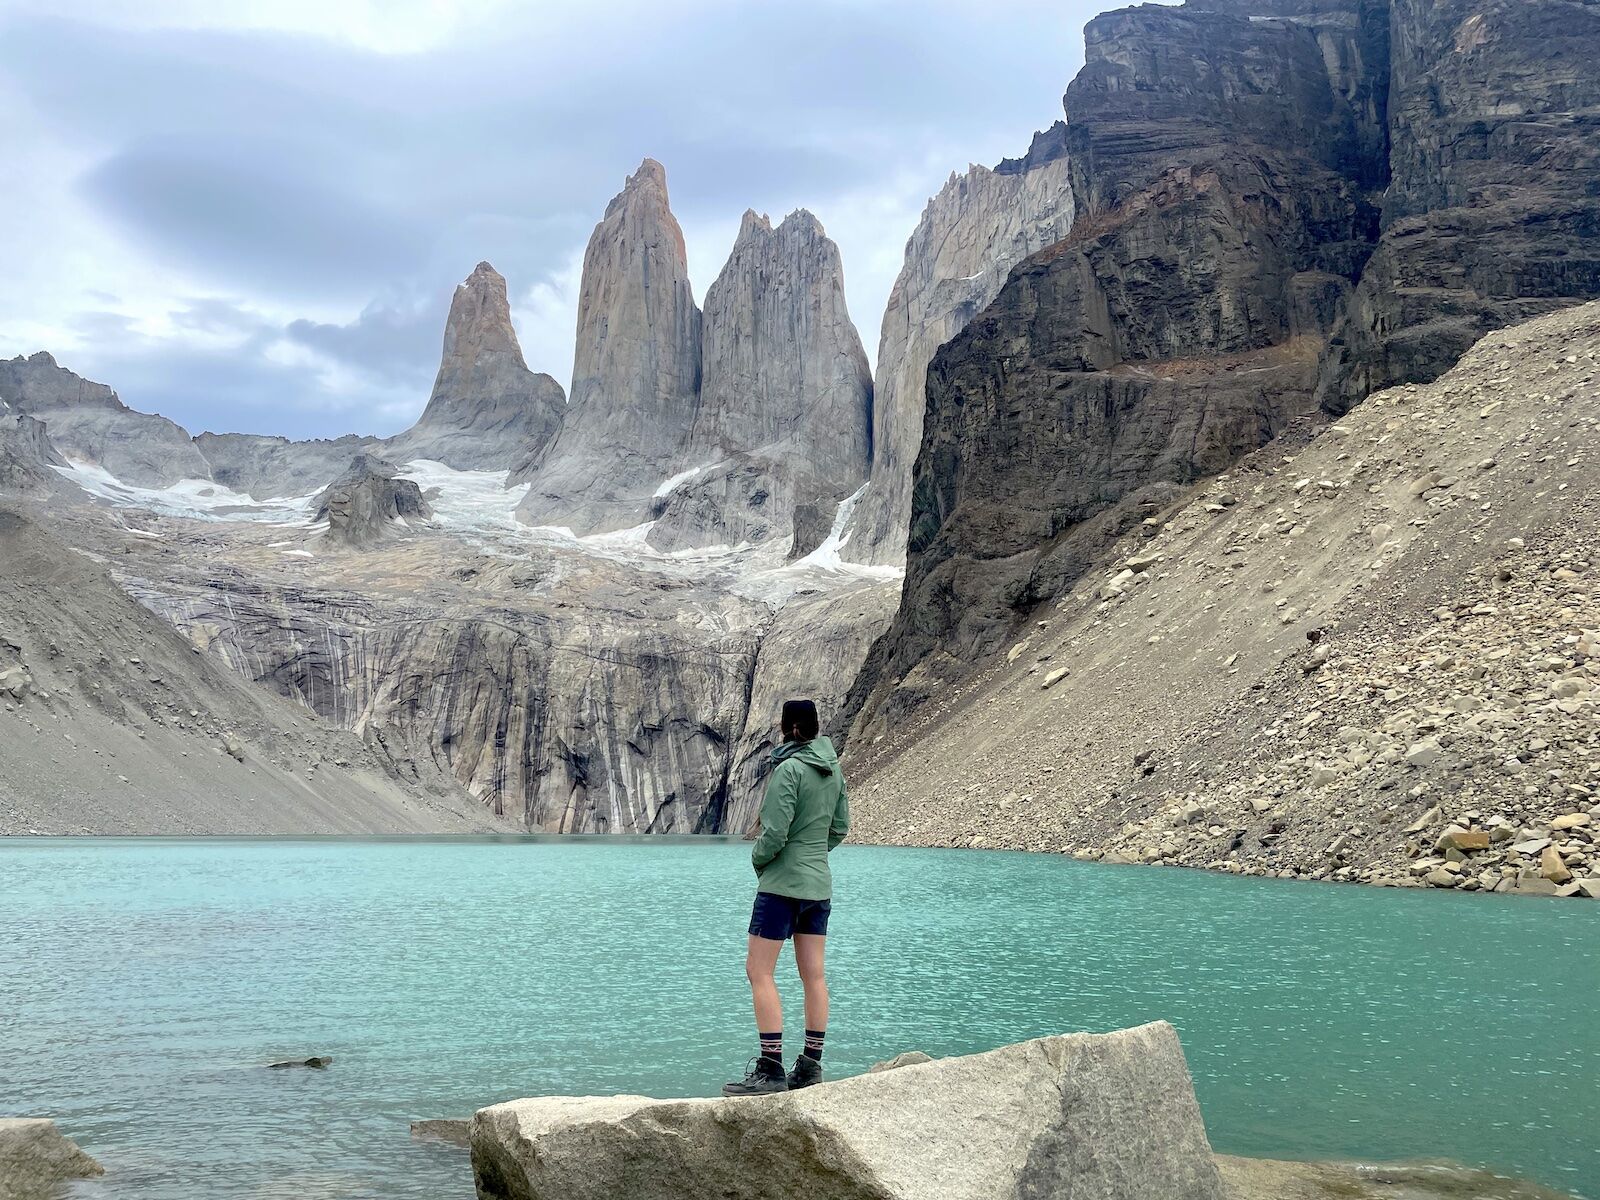 online trail reviews - hiker at torres del paine